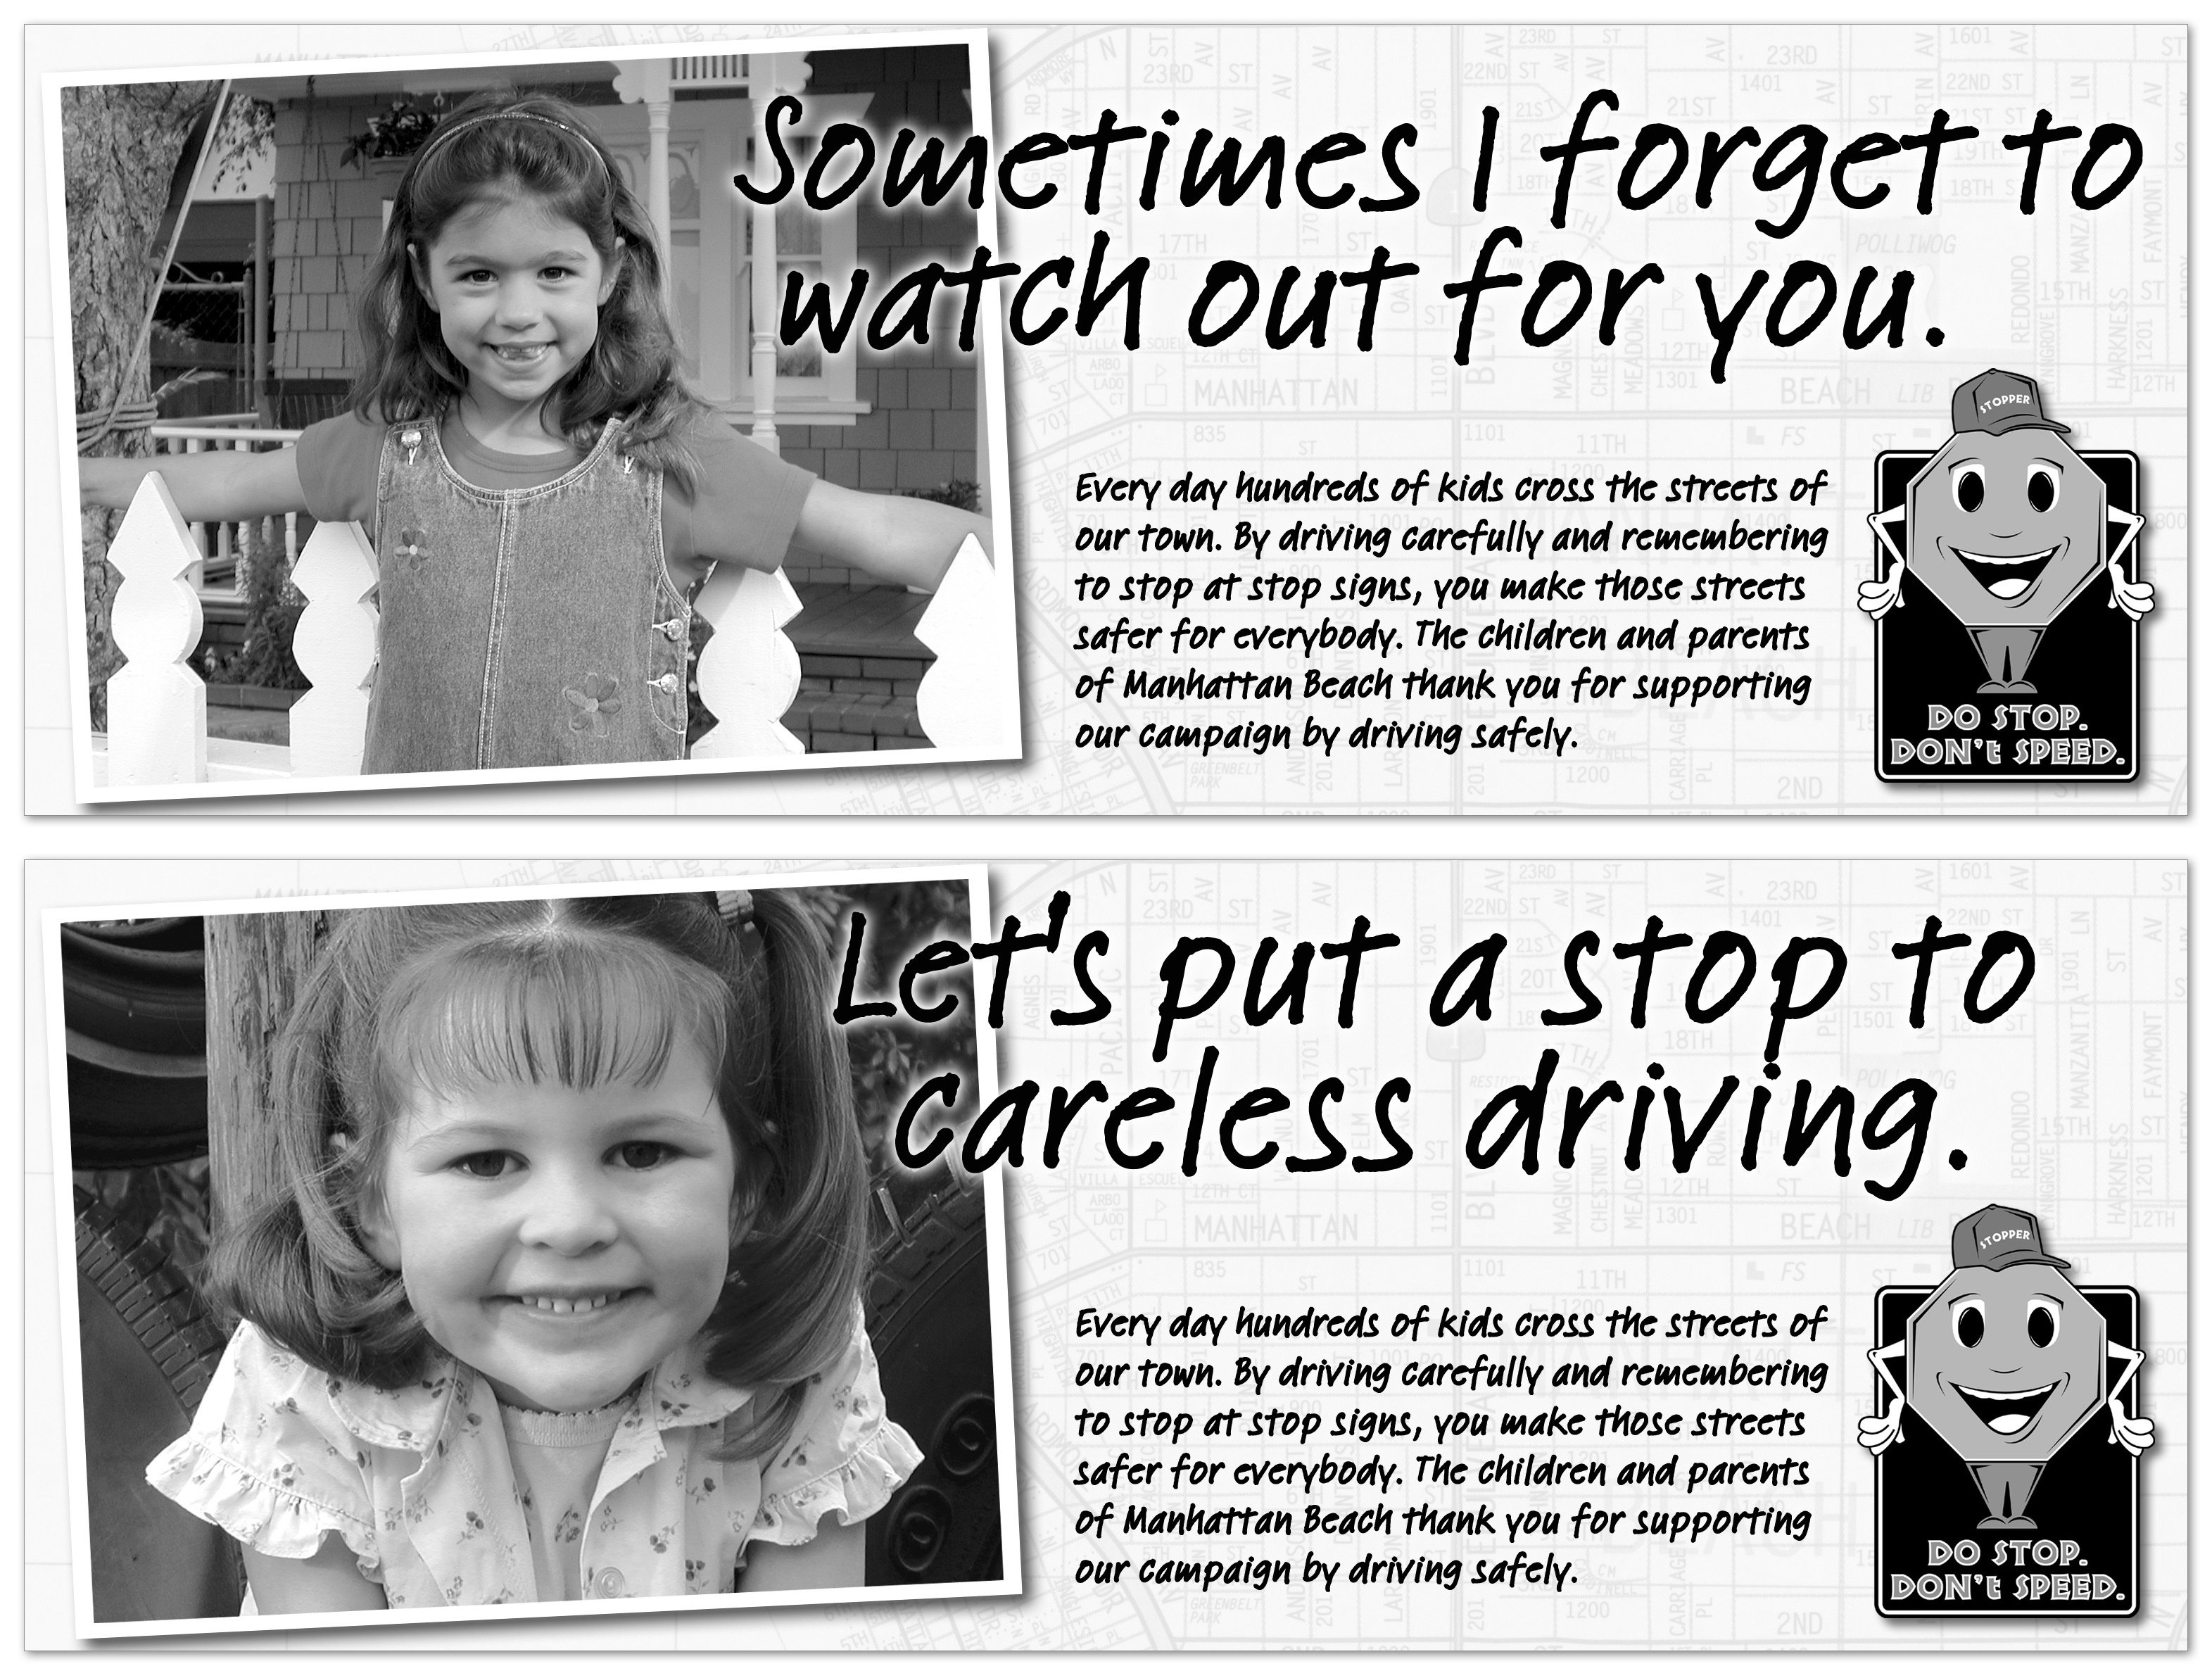 Traffic Safety newspaper campaign for the city of Manhattan Beach